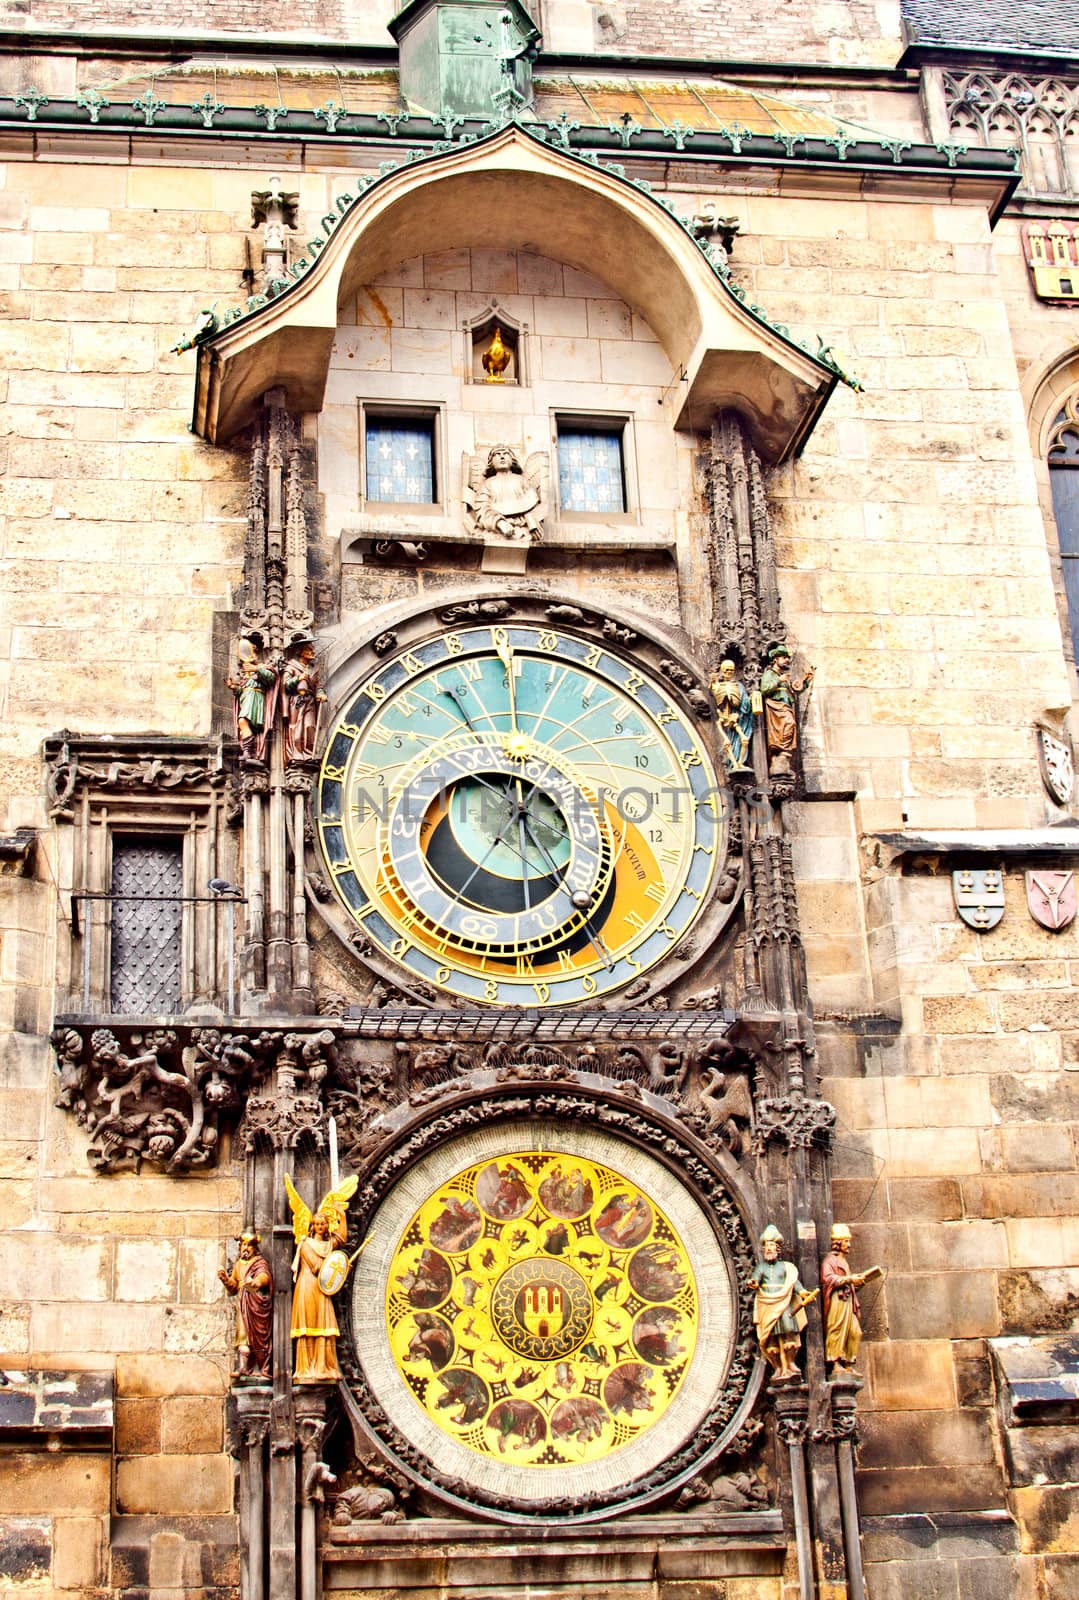 Famous astronomical clock at the Old Town square in Prague, Czec by evp82